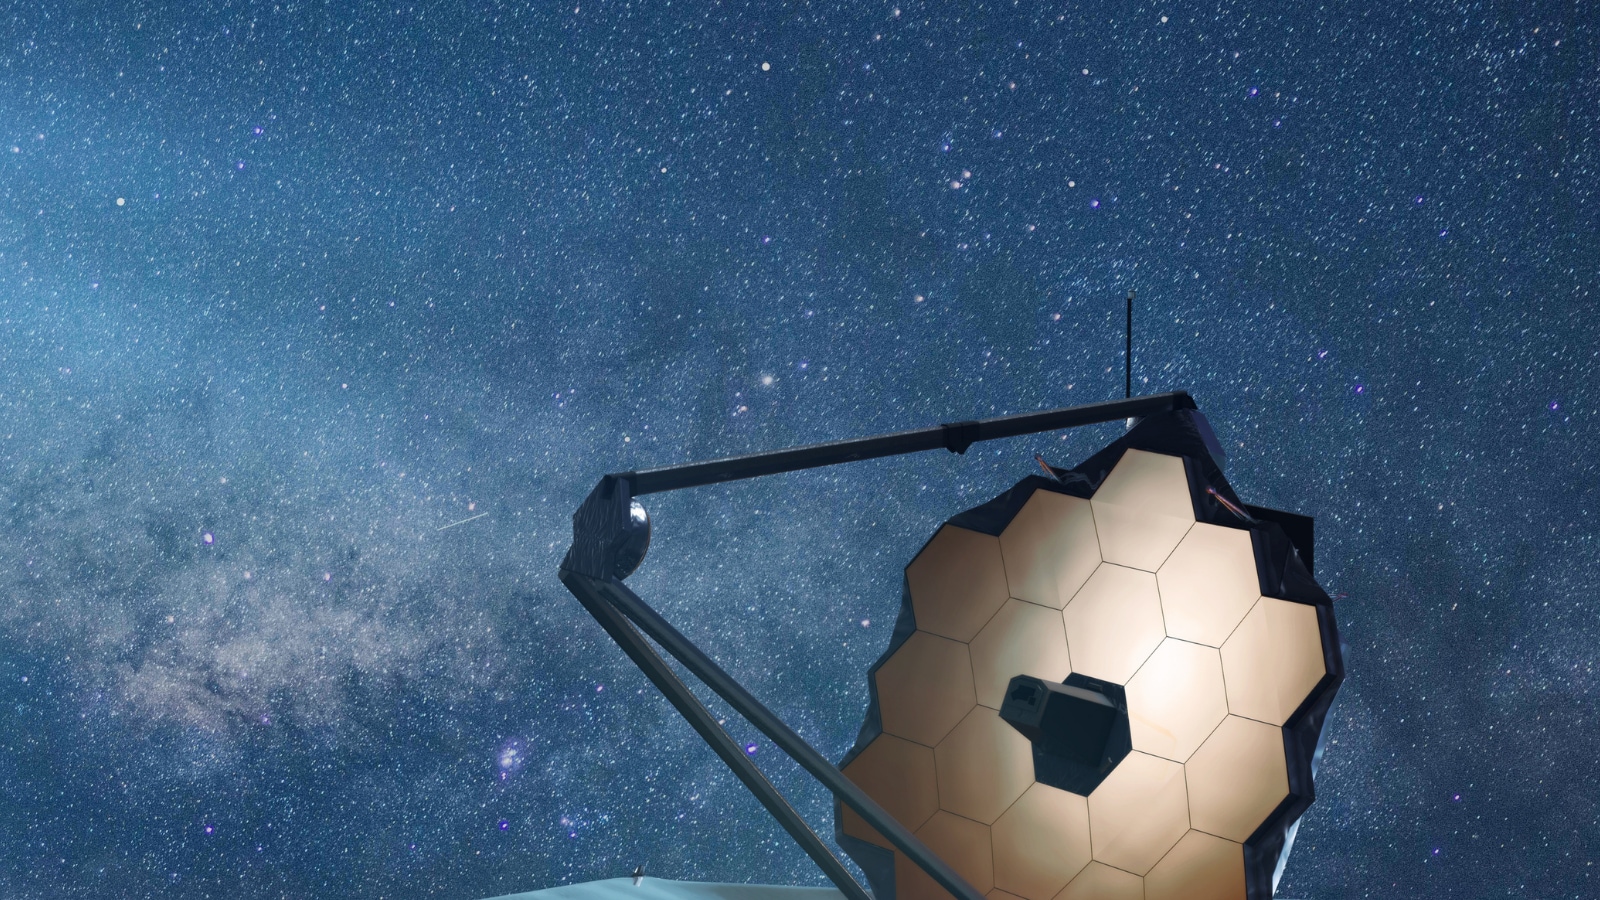 NASA to Launch James Webb Space Telescope Into Space on December 18